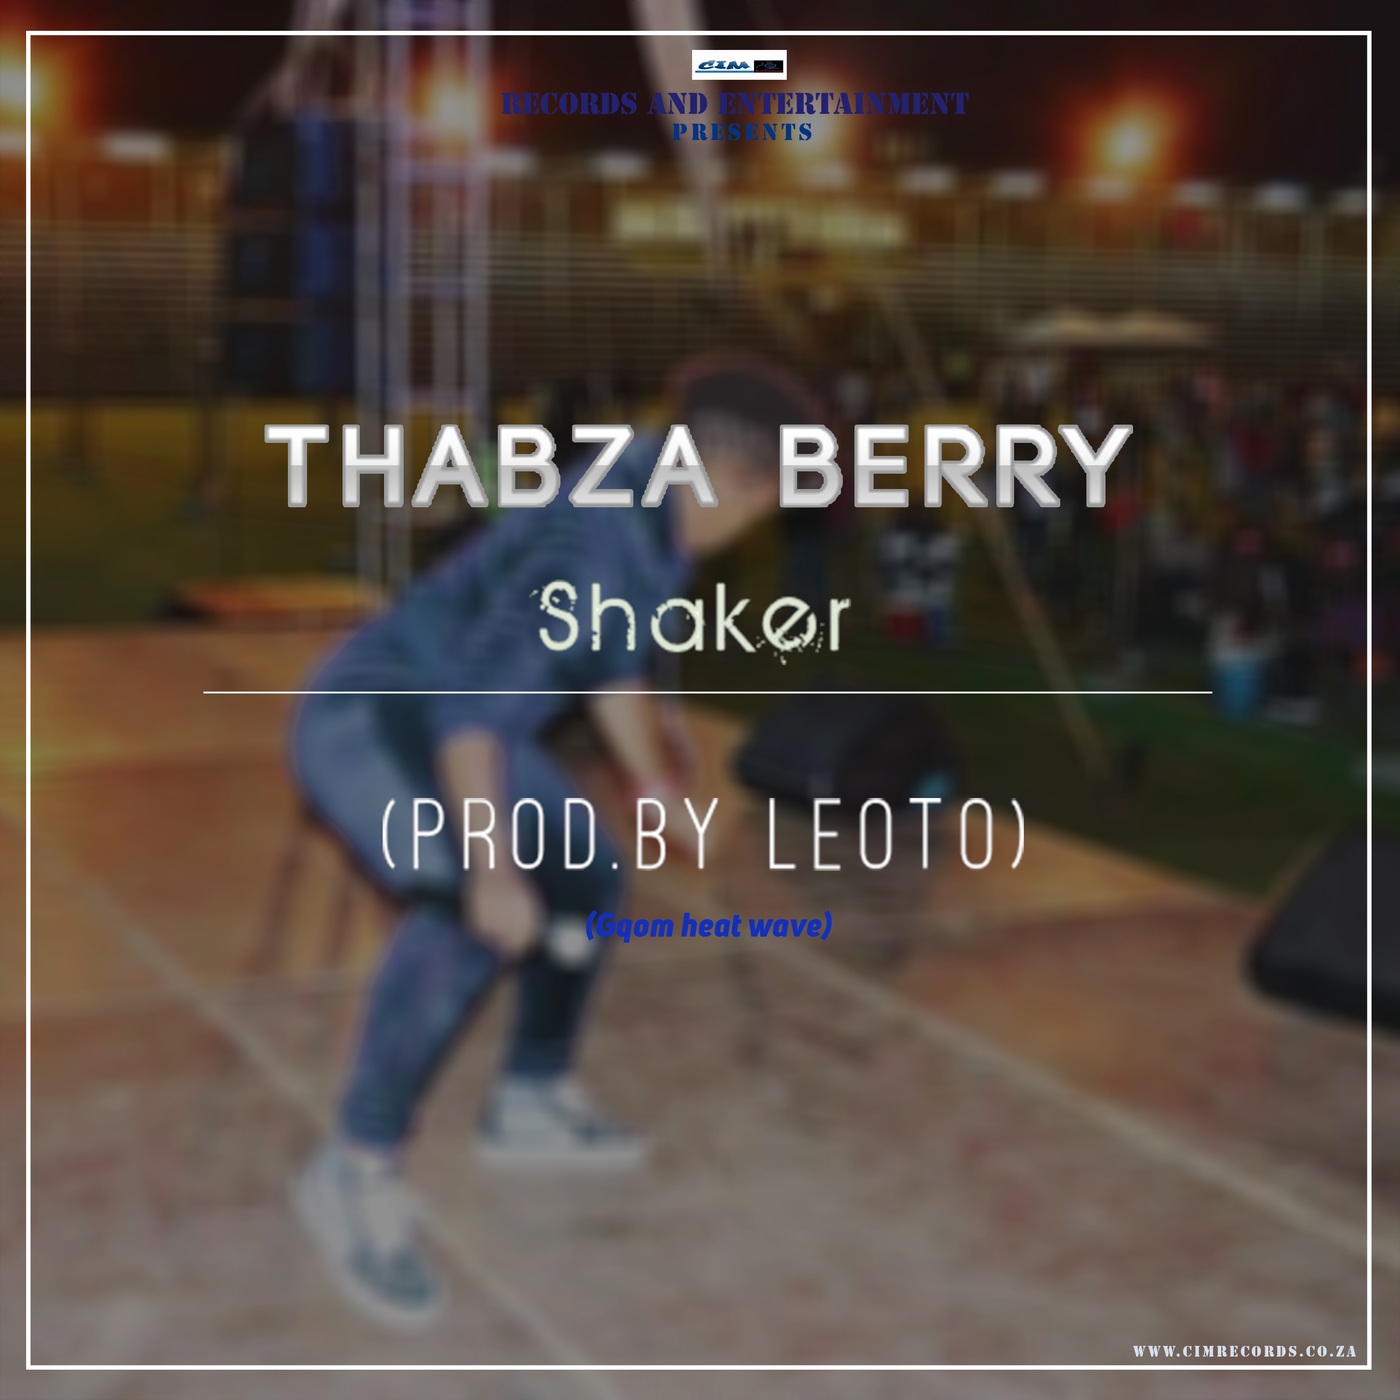 Thabza Berry - Shaker / CIM Records and Entertainment